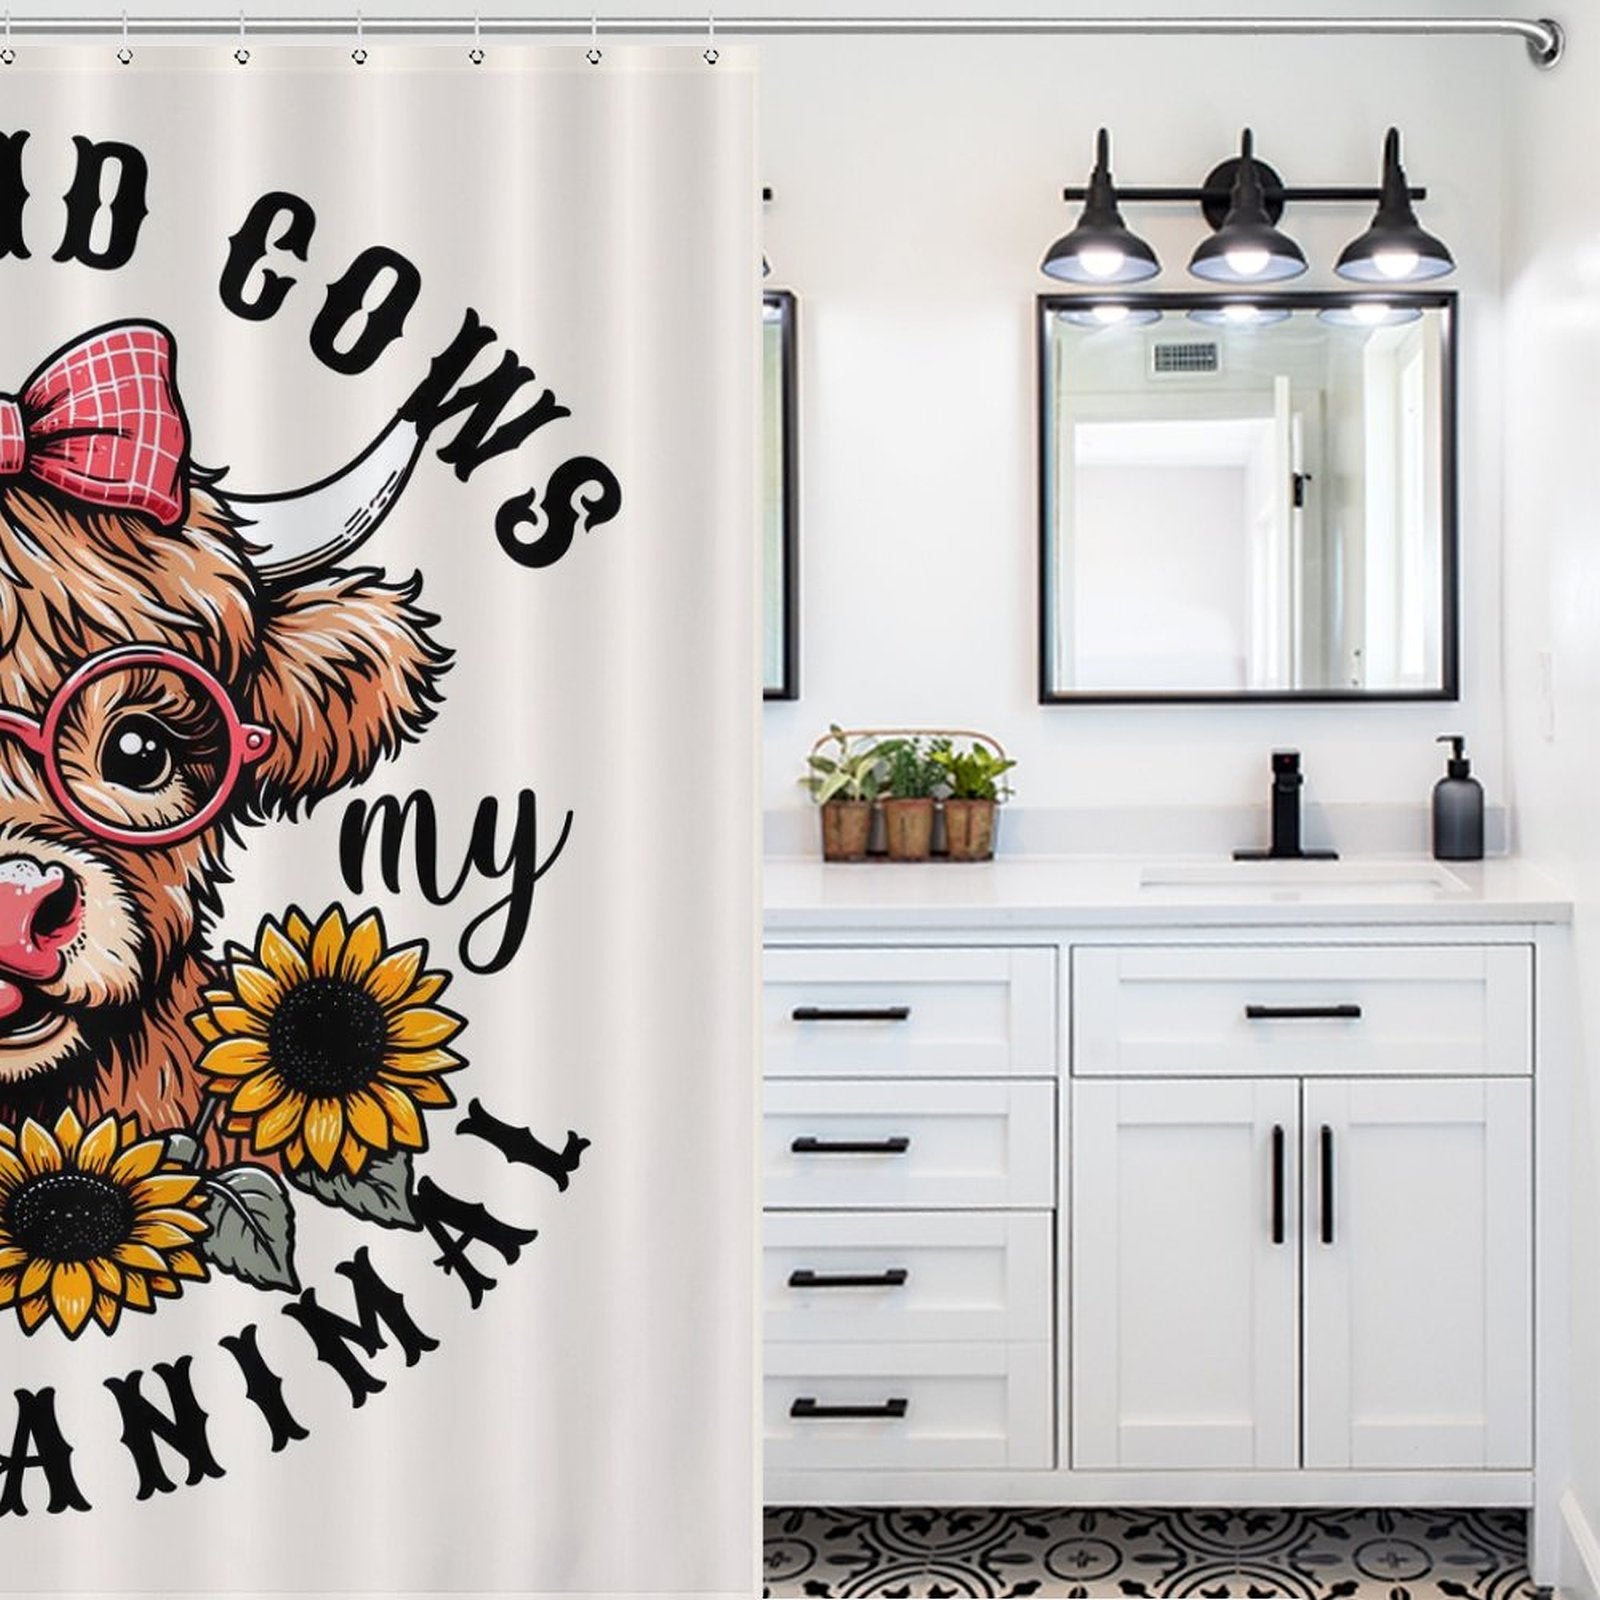 Bathroom with a white vanity, black fixtures, and a Cute Sunflower Glasses Highland Cow Shower Curtain-Cottoncat by Cotton Cat featuring a cow wearing glasses and a bow, surrounded by sunflowers. This whimsical bathroom decor adds charm and character with its playful design on waterproof fabric.